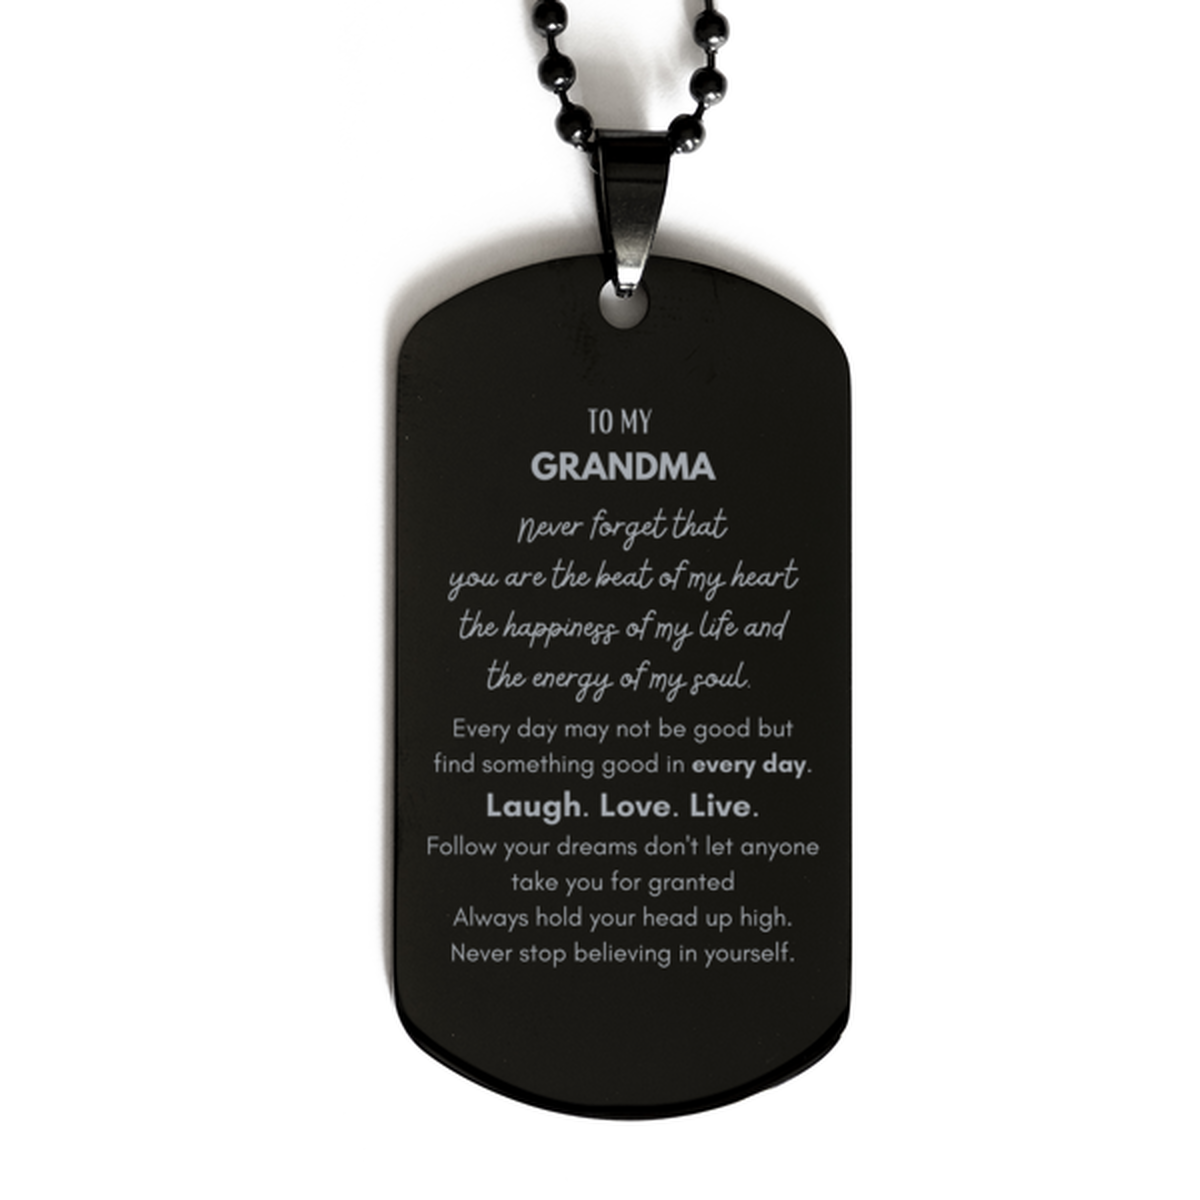 To My Grandma Dogtag Gifts, Christmas Grandma Black Dog Tag Present, Birthday Unique Motivational For Grandma, To My Grandma Never forget that you are the beat of my heart the happiness of my life and the energy of my soul